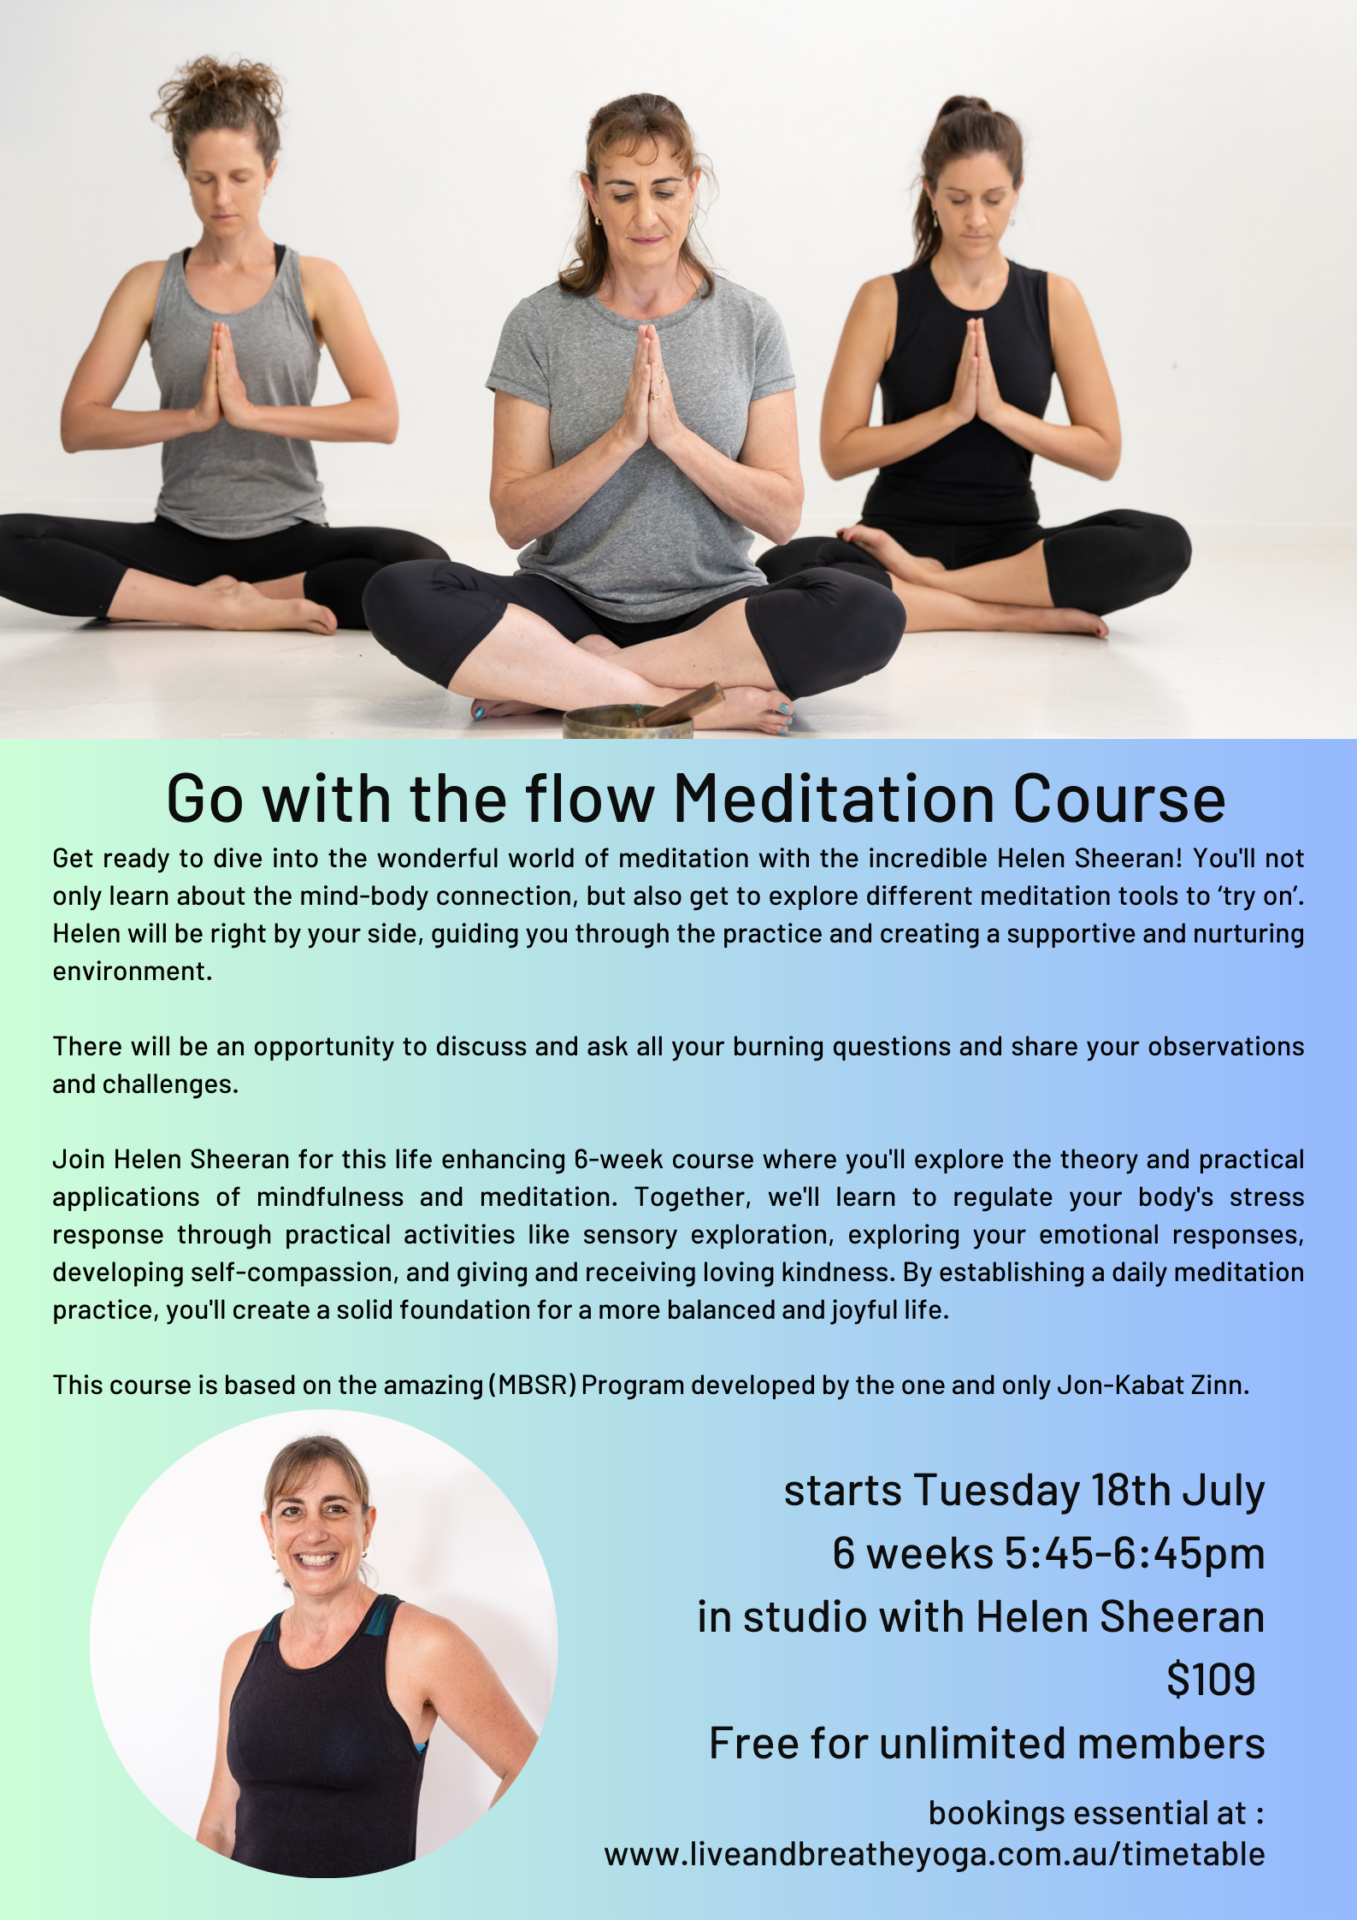 Go with the Flow Meditation course - Live and Breathe Yoga